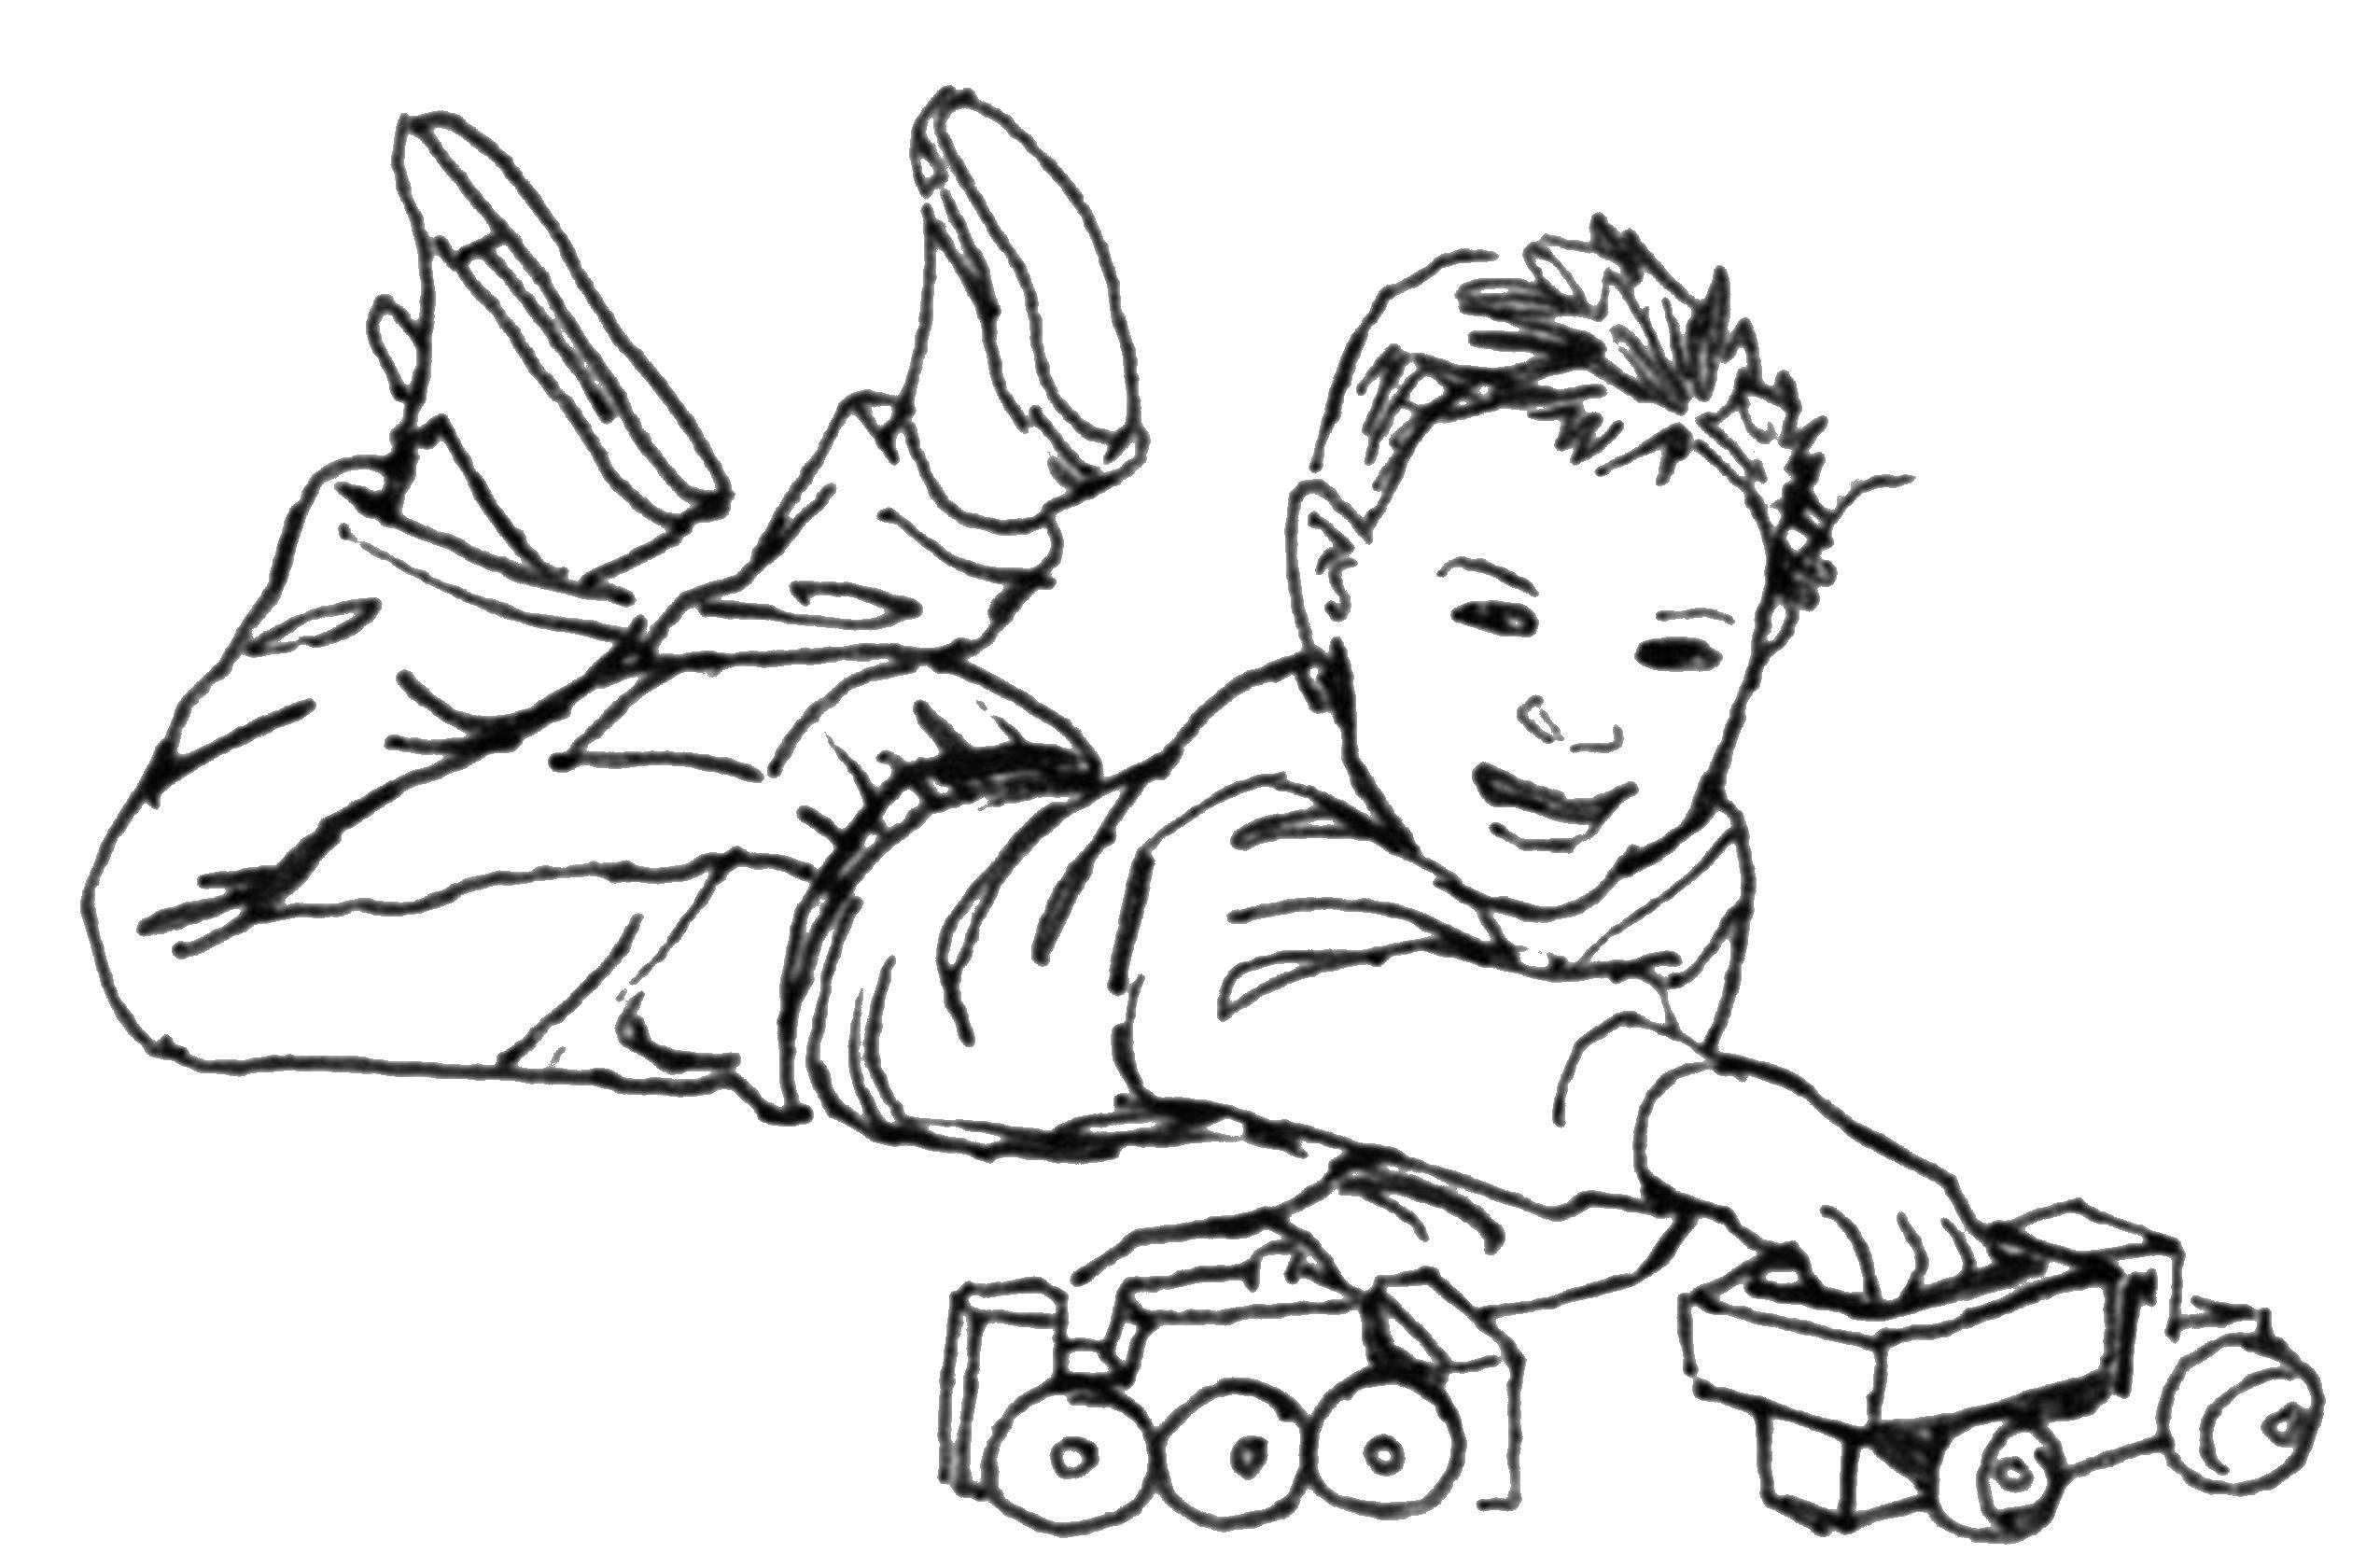 Coloring Boy playing. Category For boys . Tags:  children, boy, child.